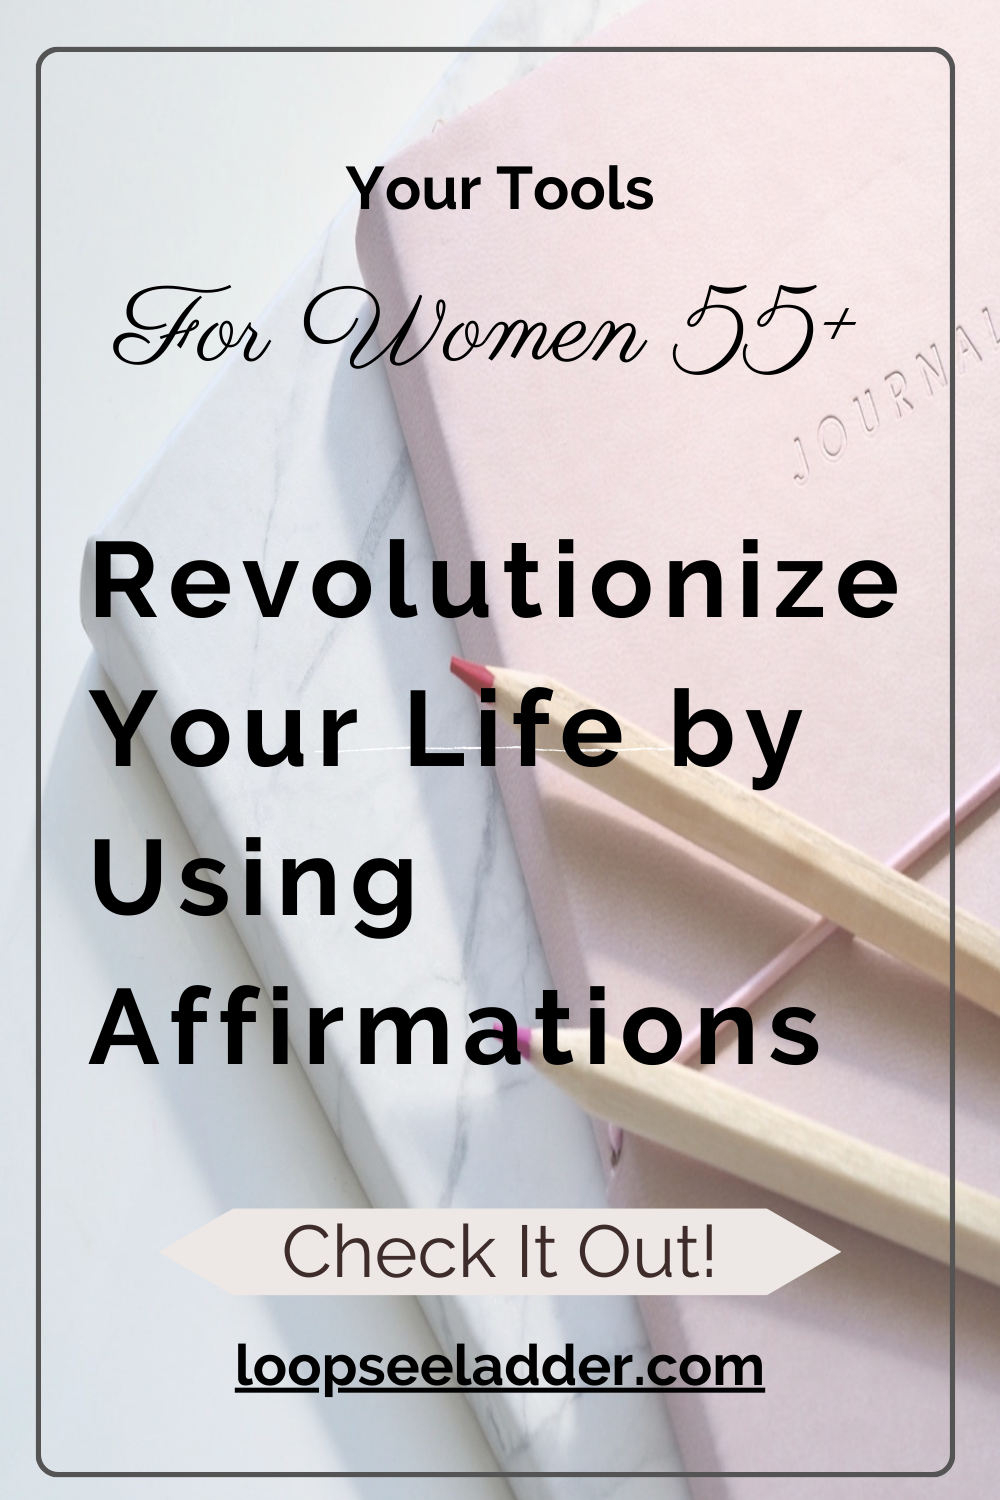 Revolutionize Your Life: The Astonishing Effects of Affirmations on Women Over 55